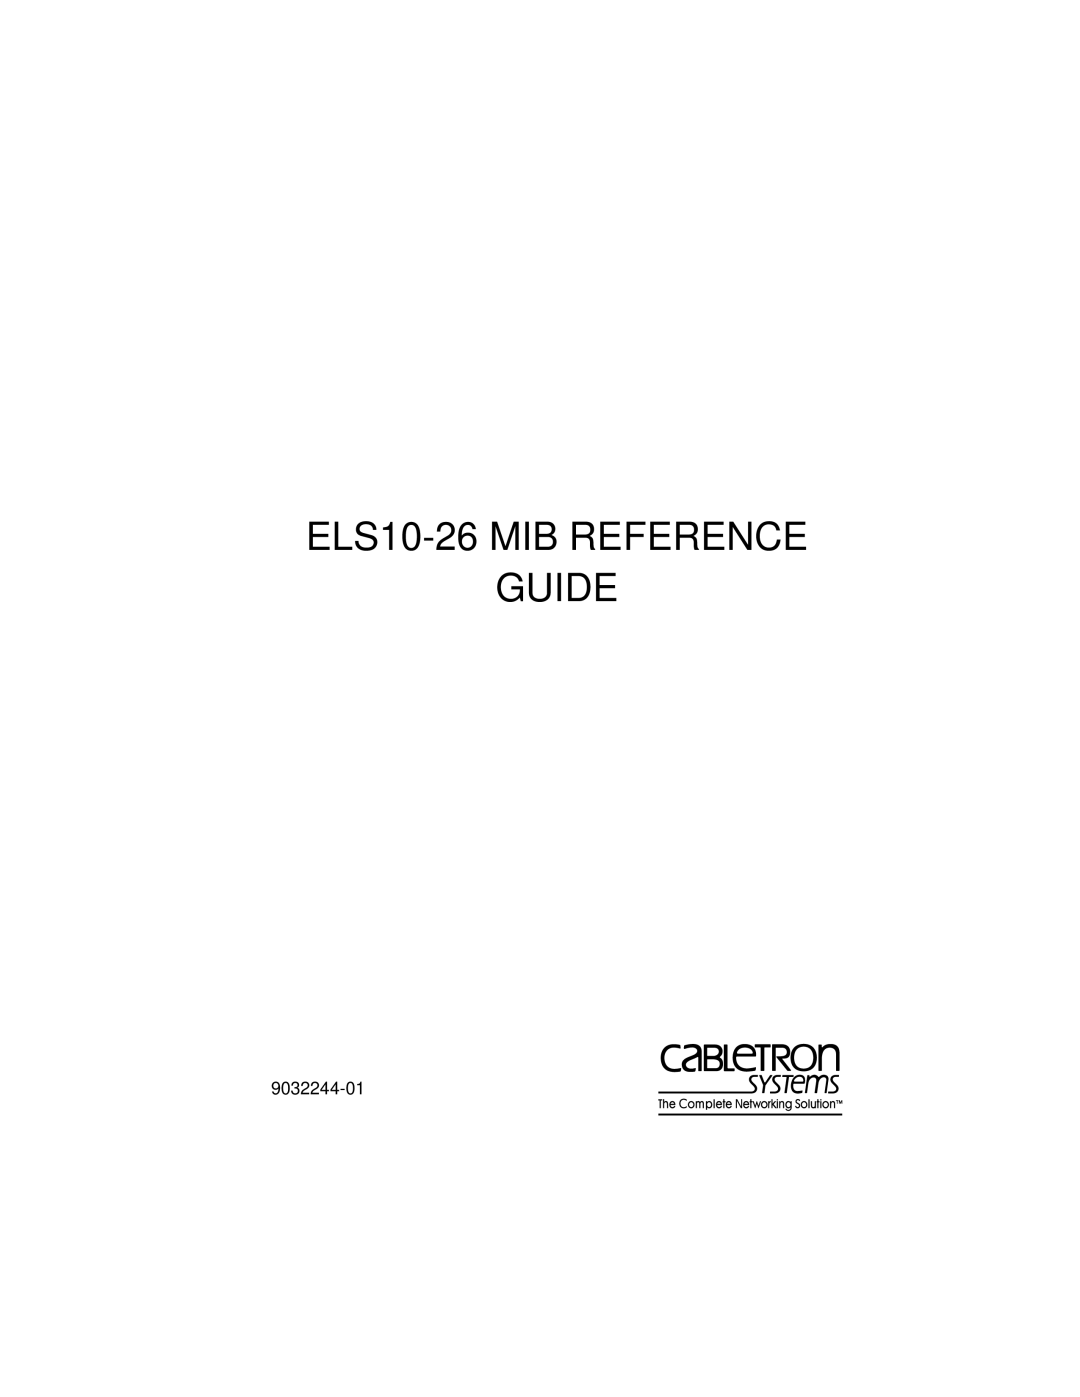 Cabletron Systems manual ELS10-26 MIB REFERENCE, Guide, 9032244-01 